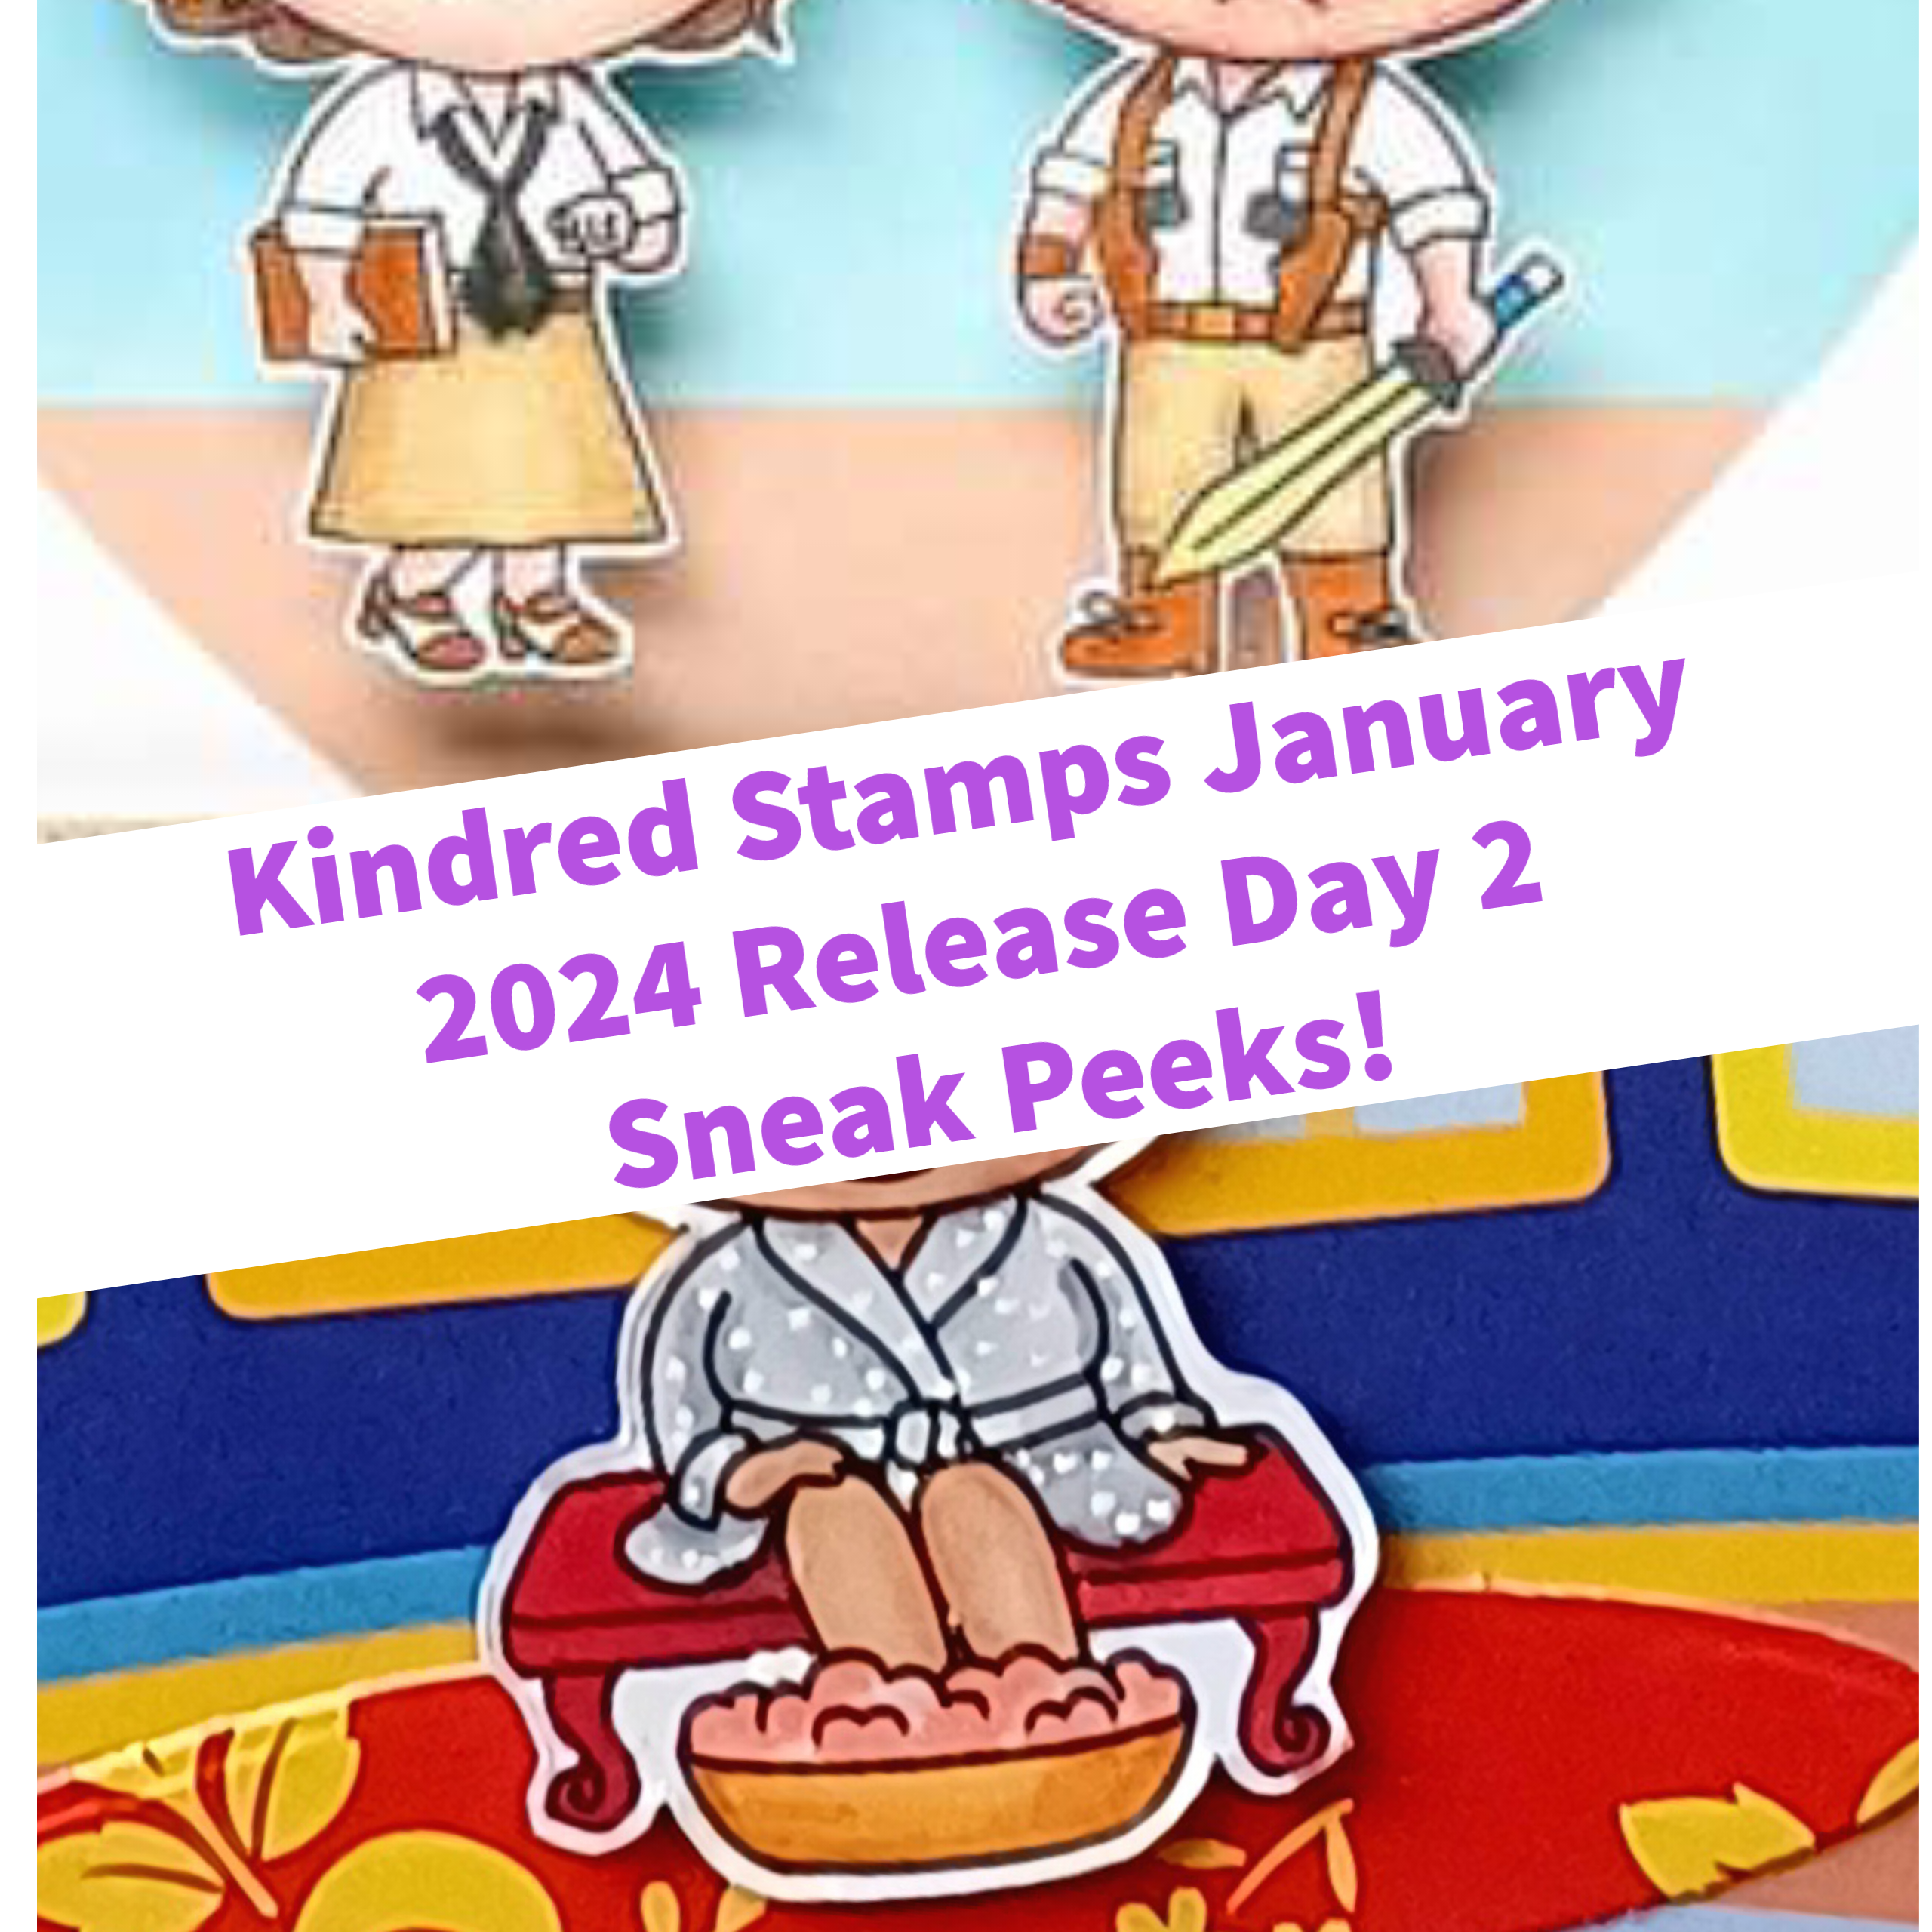 January Release Day 2 - Tomb Raider and Kindred Town-Beauty and Spa